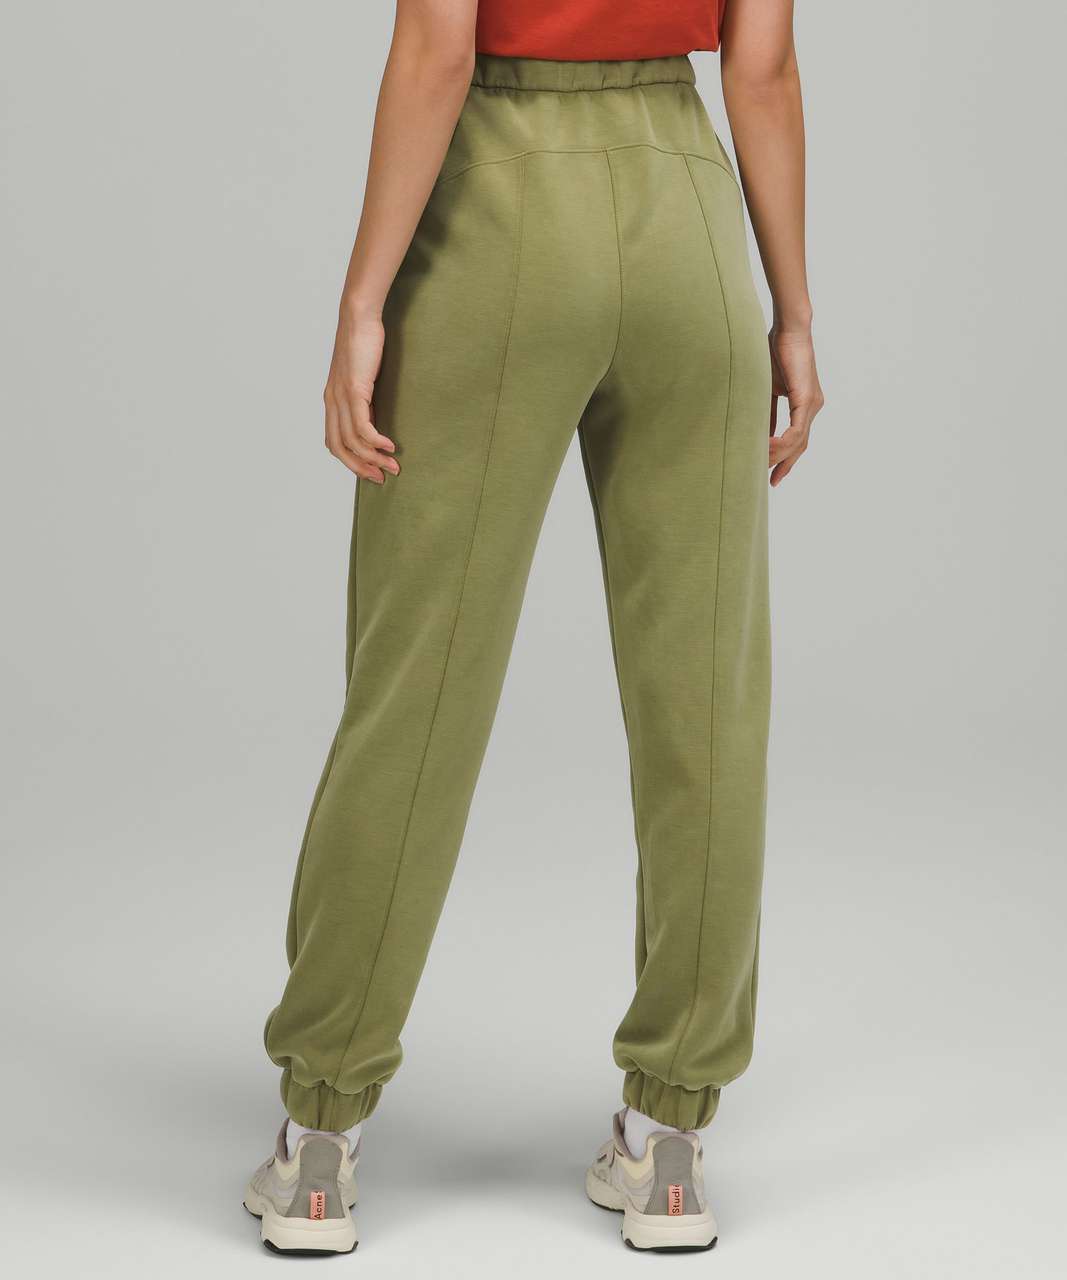 Lululemon Softstreme Relaxed High-Rise Pant - Bronze Green